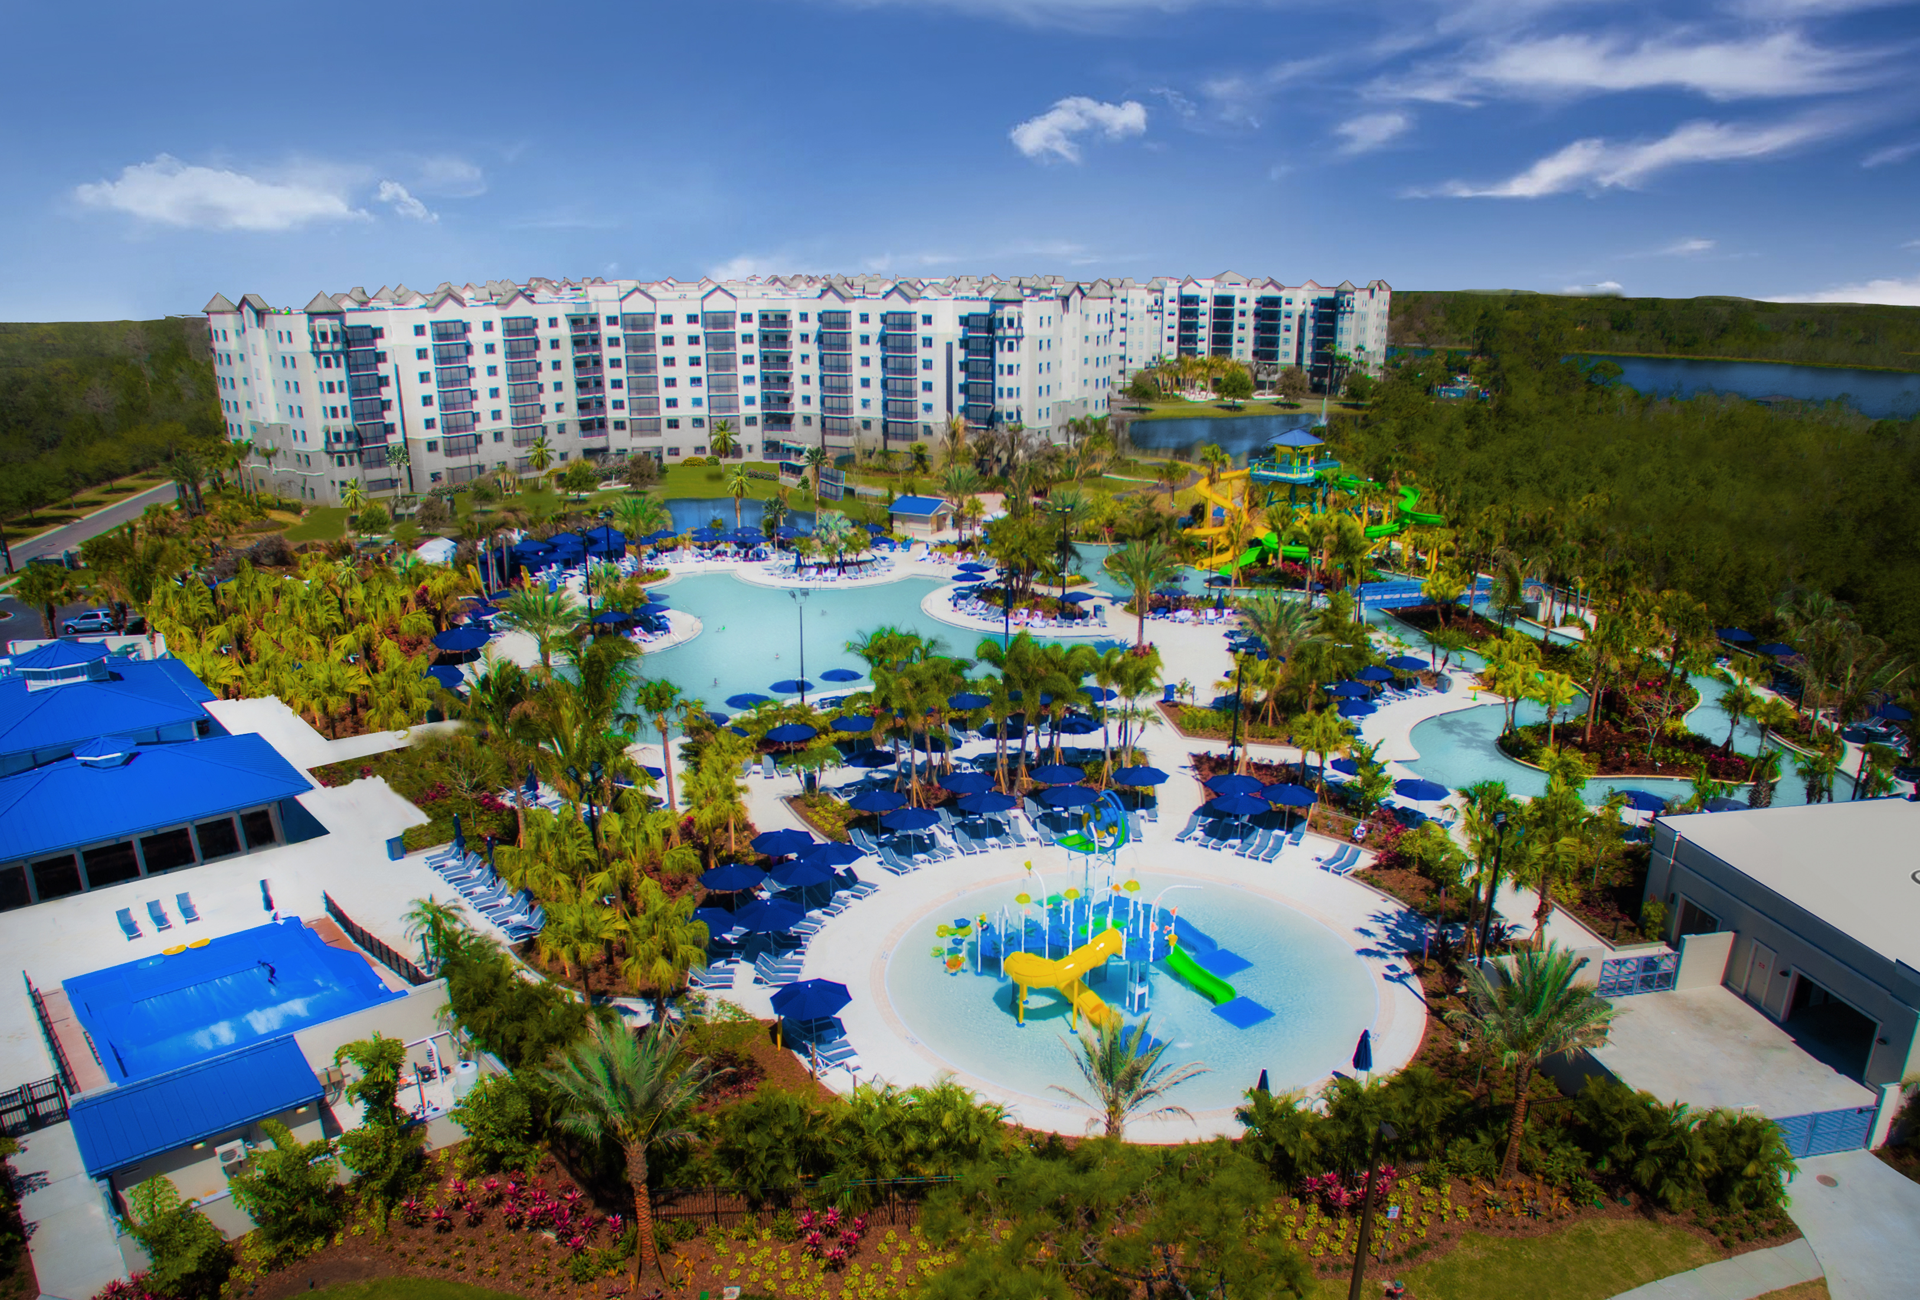 Here's what's next for The Grove Resort's $150M expansion - GroveResidences